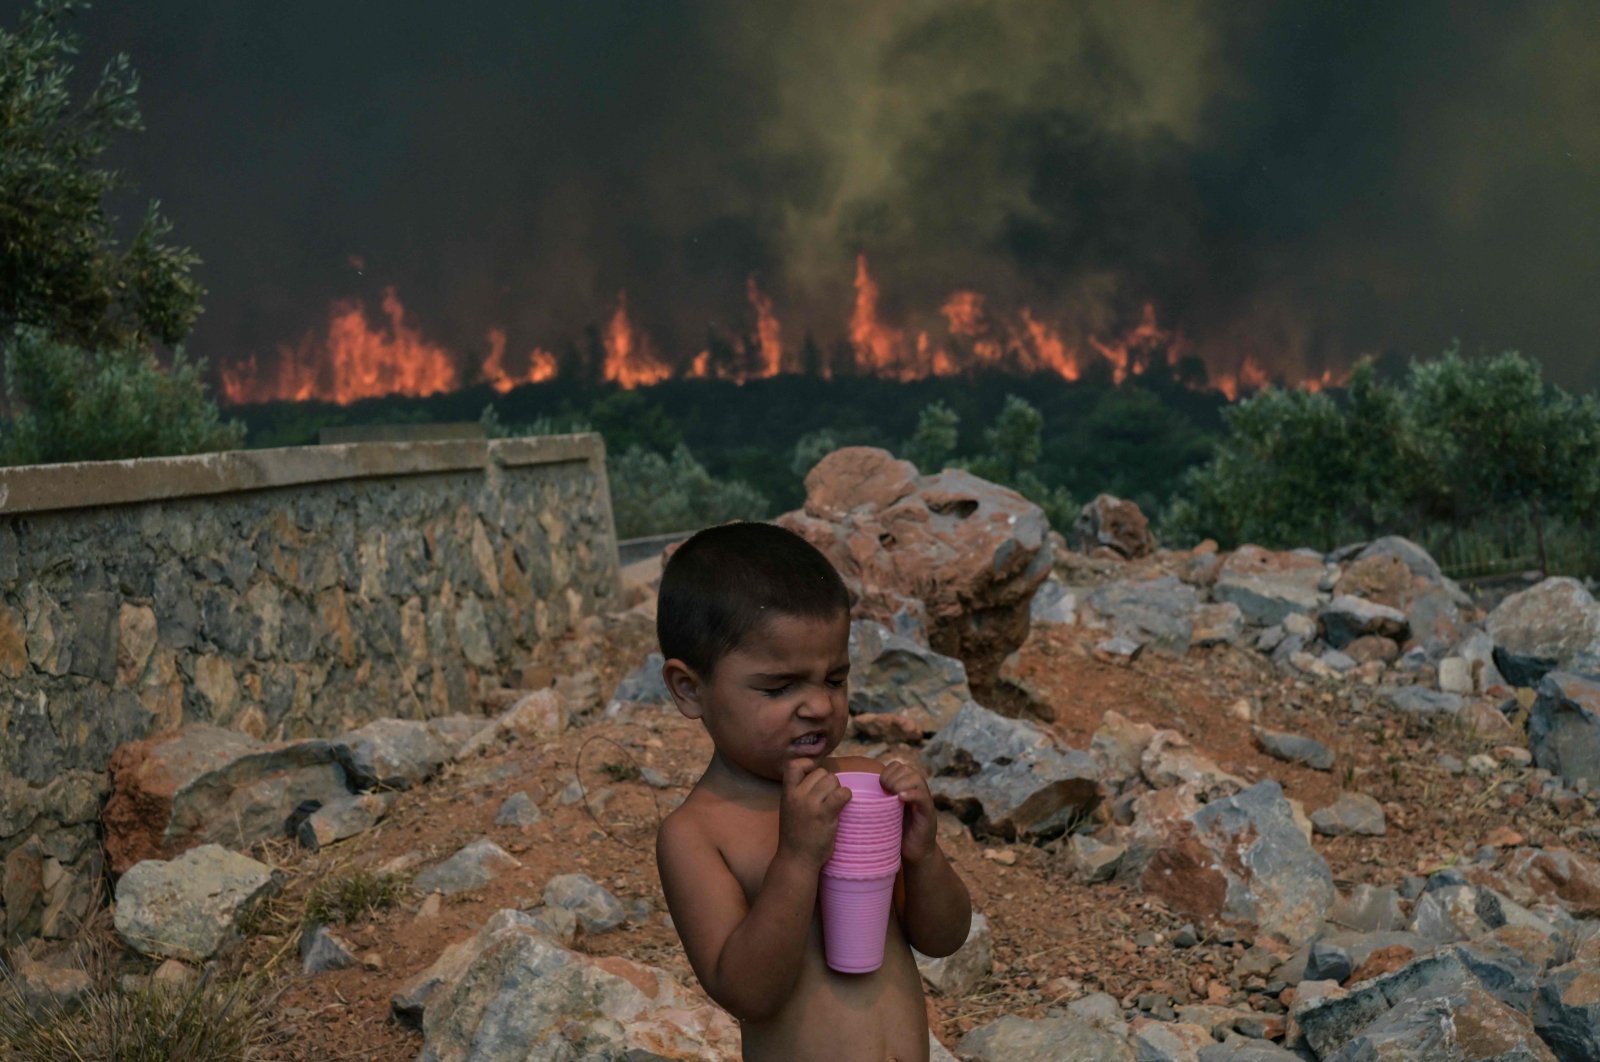 Fires, health risks mount amid extreme heat across 3 continents